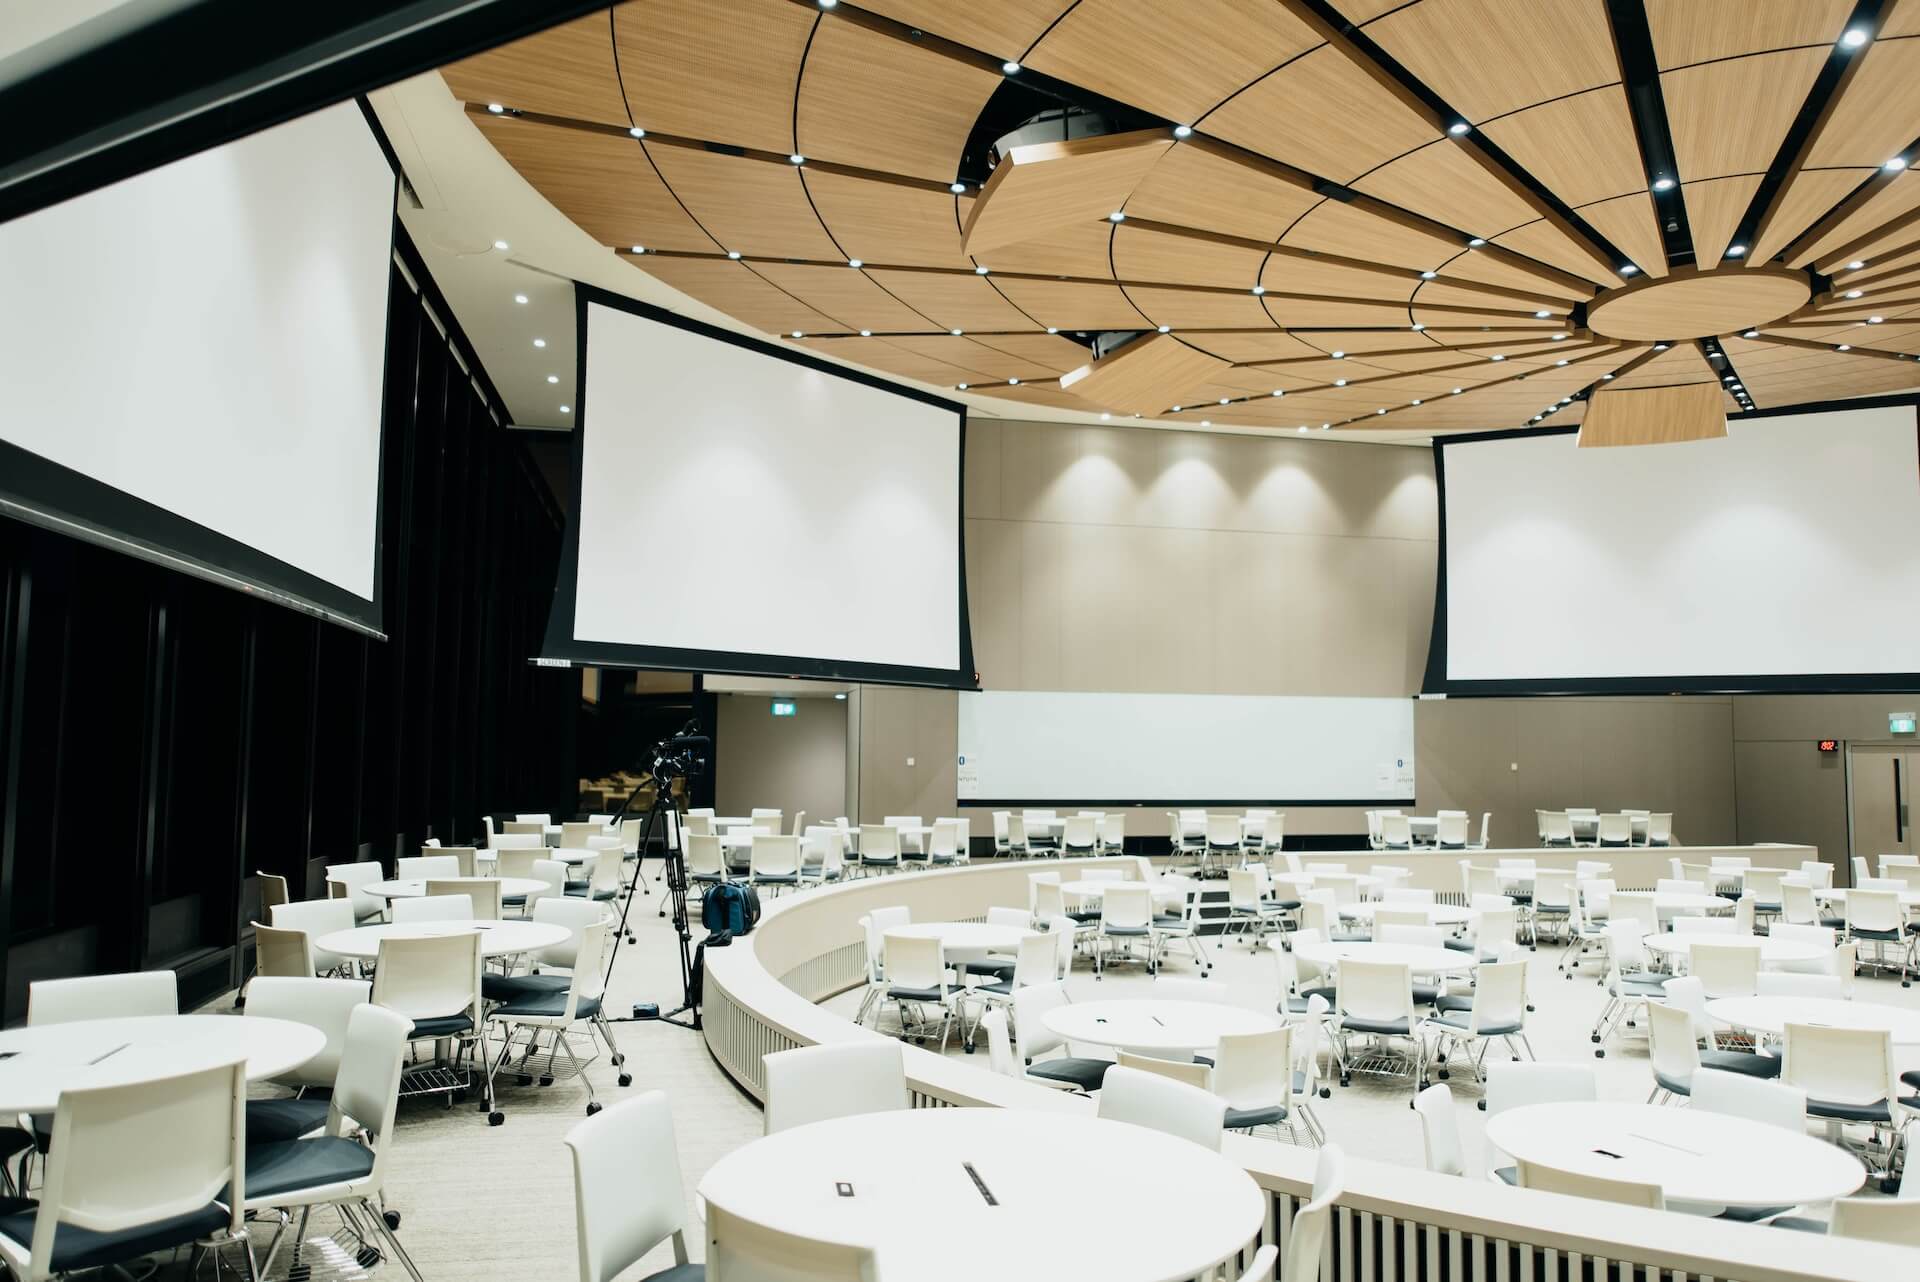 Inside a of a large conference room with tables and chairs